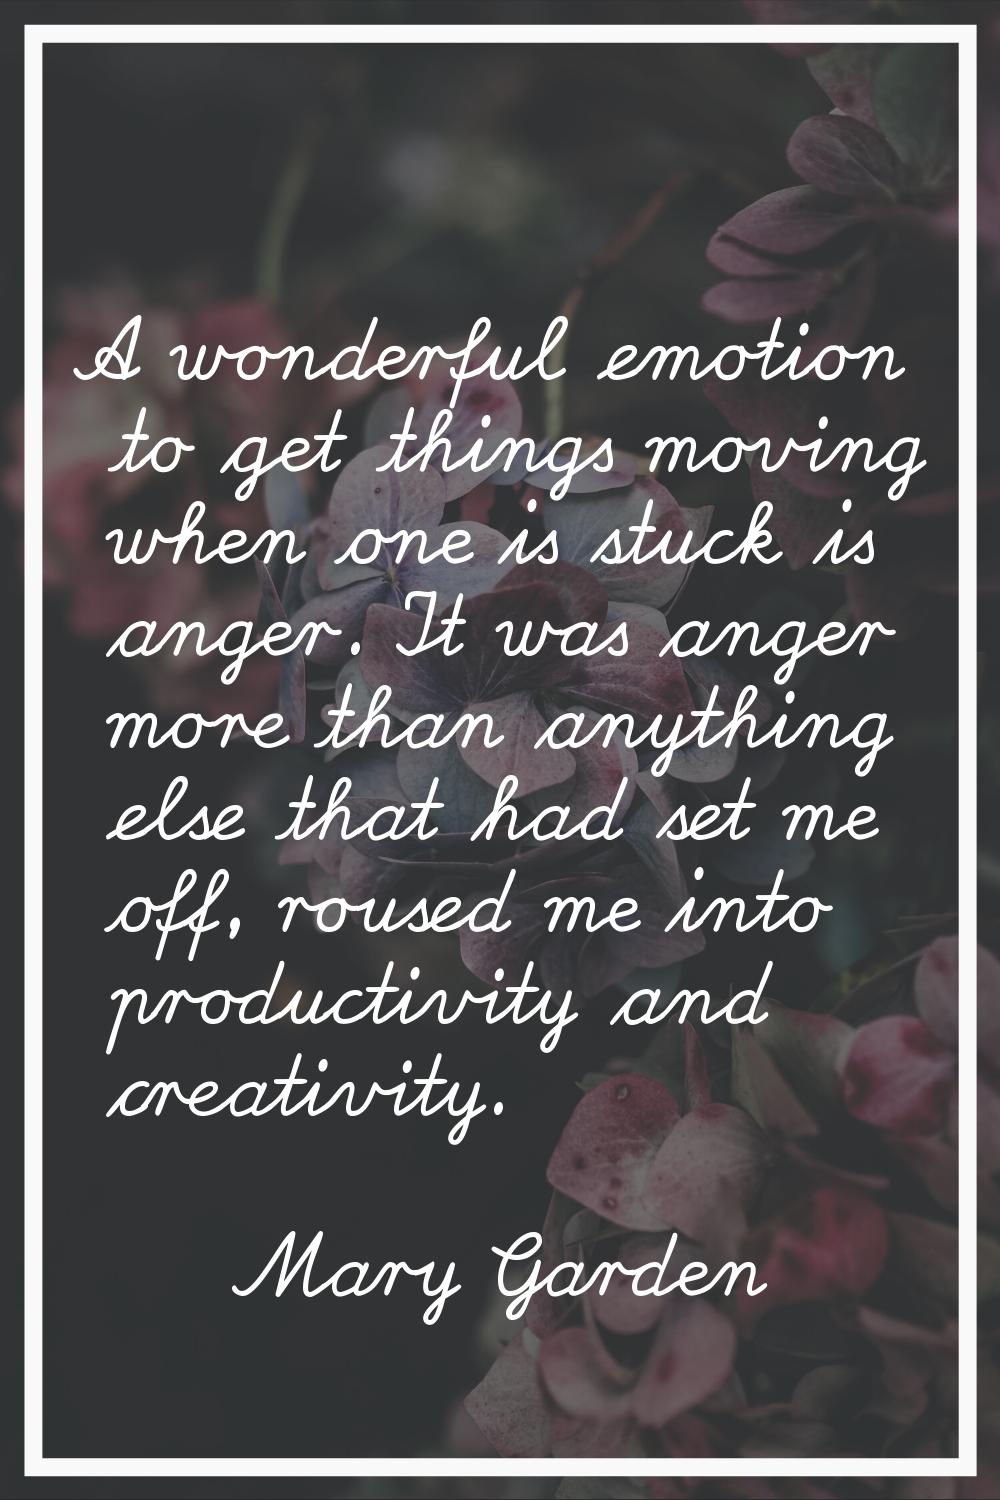 A wonderful emotion to get things moving when one is stuck is anger. It was anger more than anythin